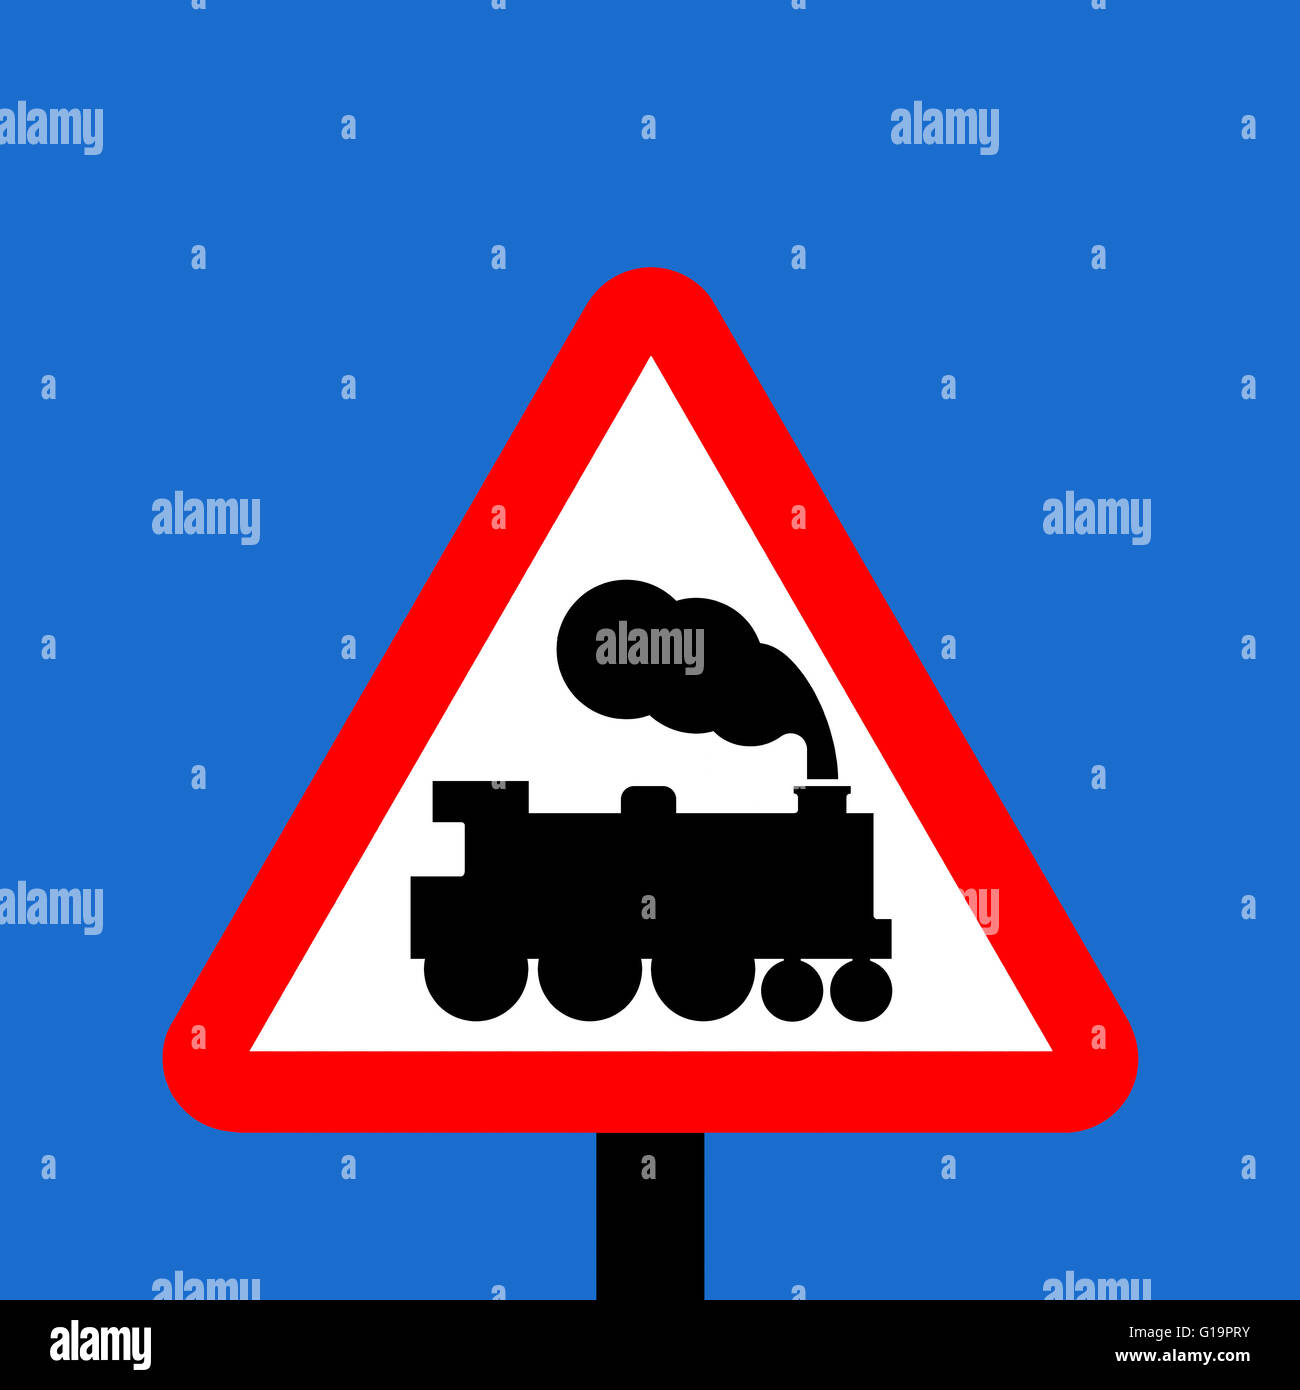 Warning triangle Level crossing without barrier or gate ahead Stock Photo